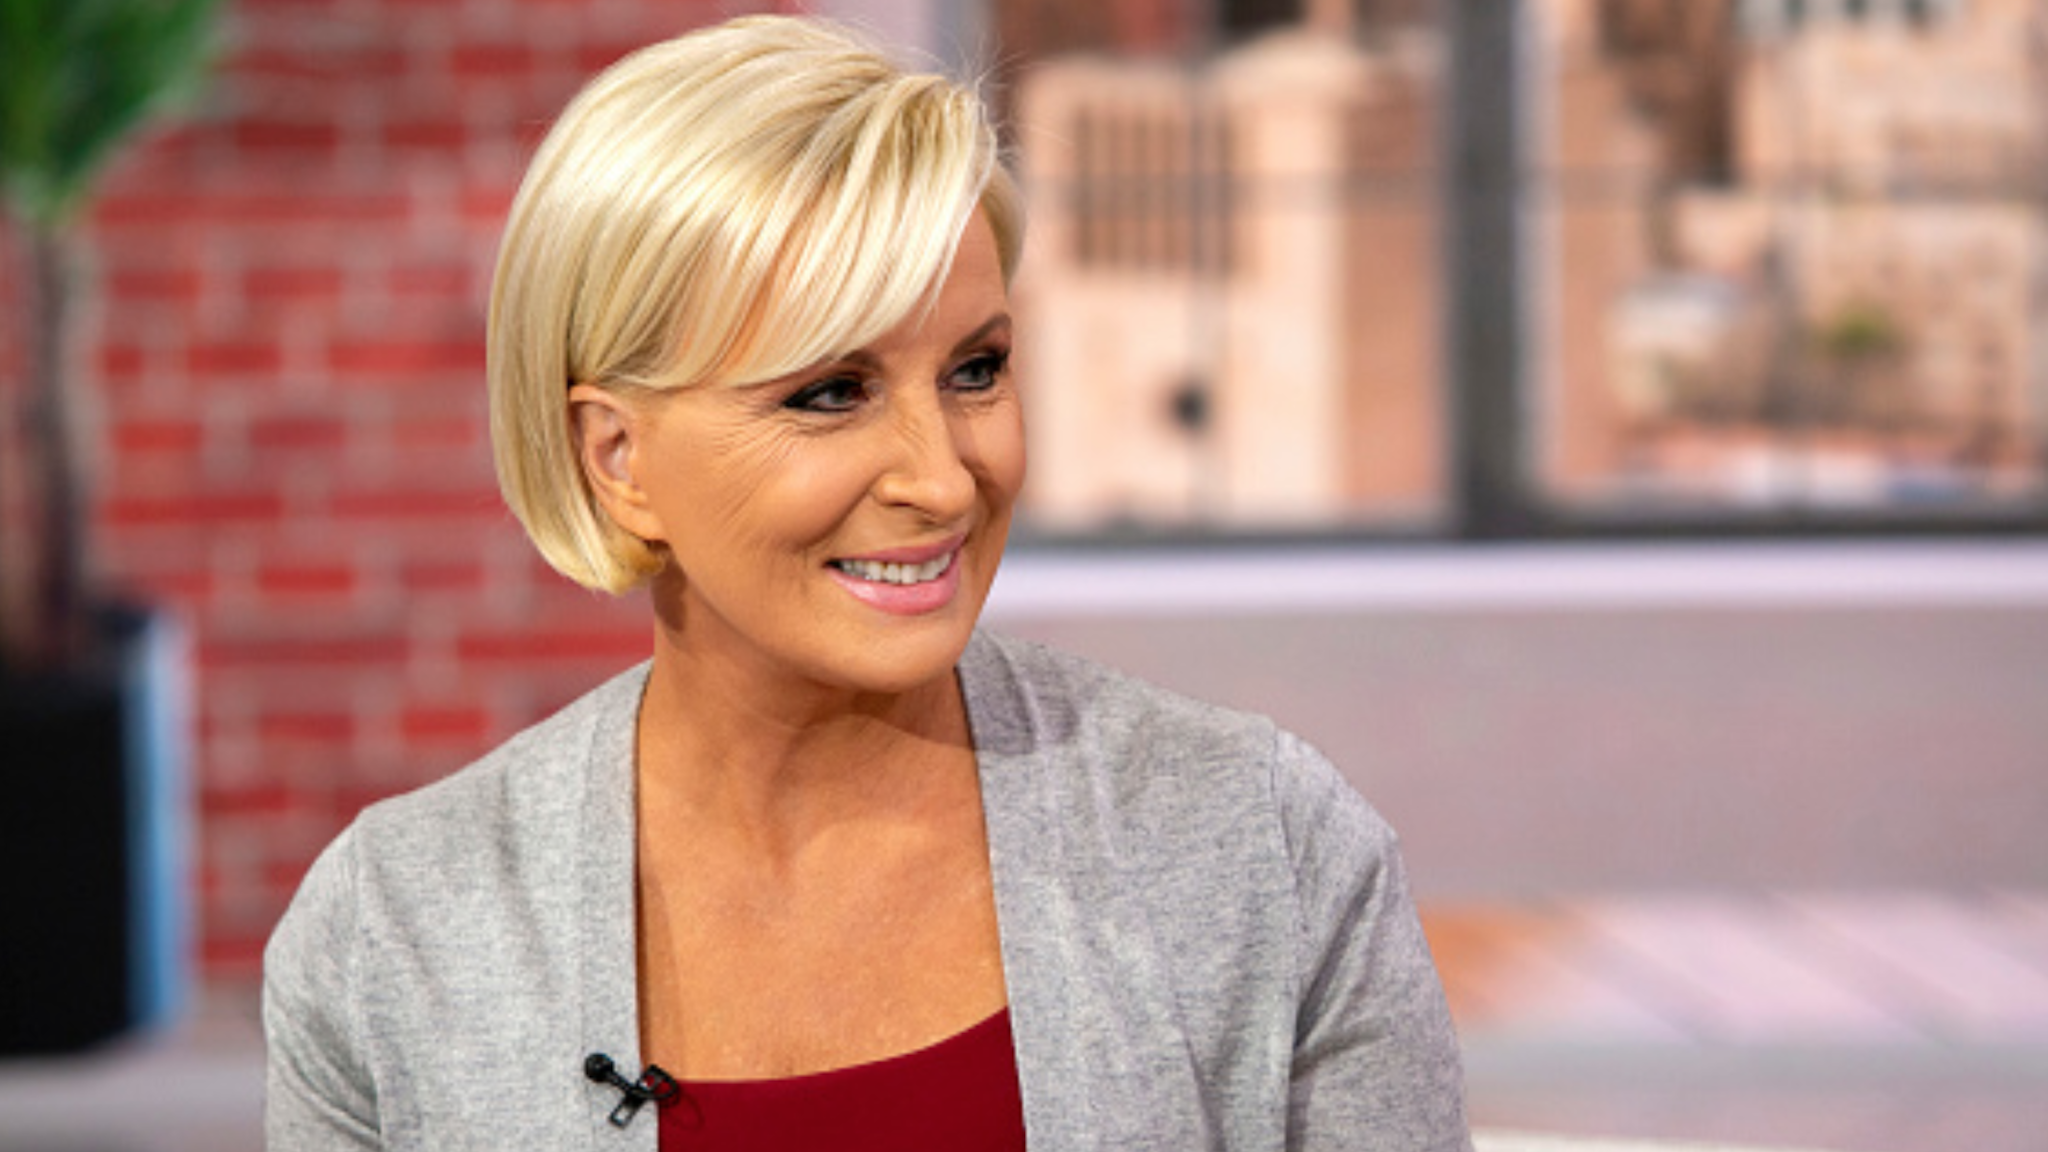 TODAY -- Pictured: Mika Brzezinski on Thursday, May 9, 2019